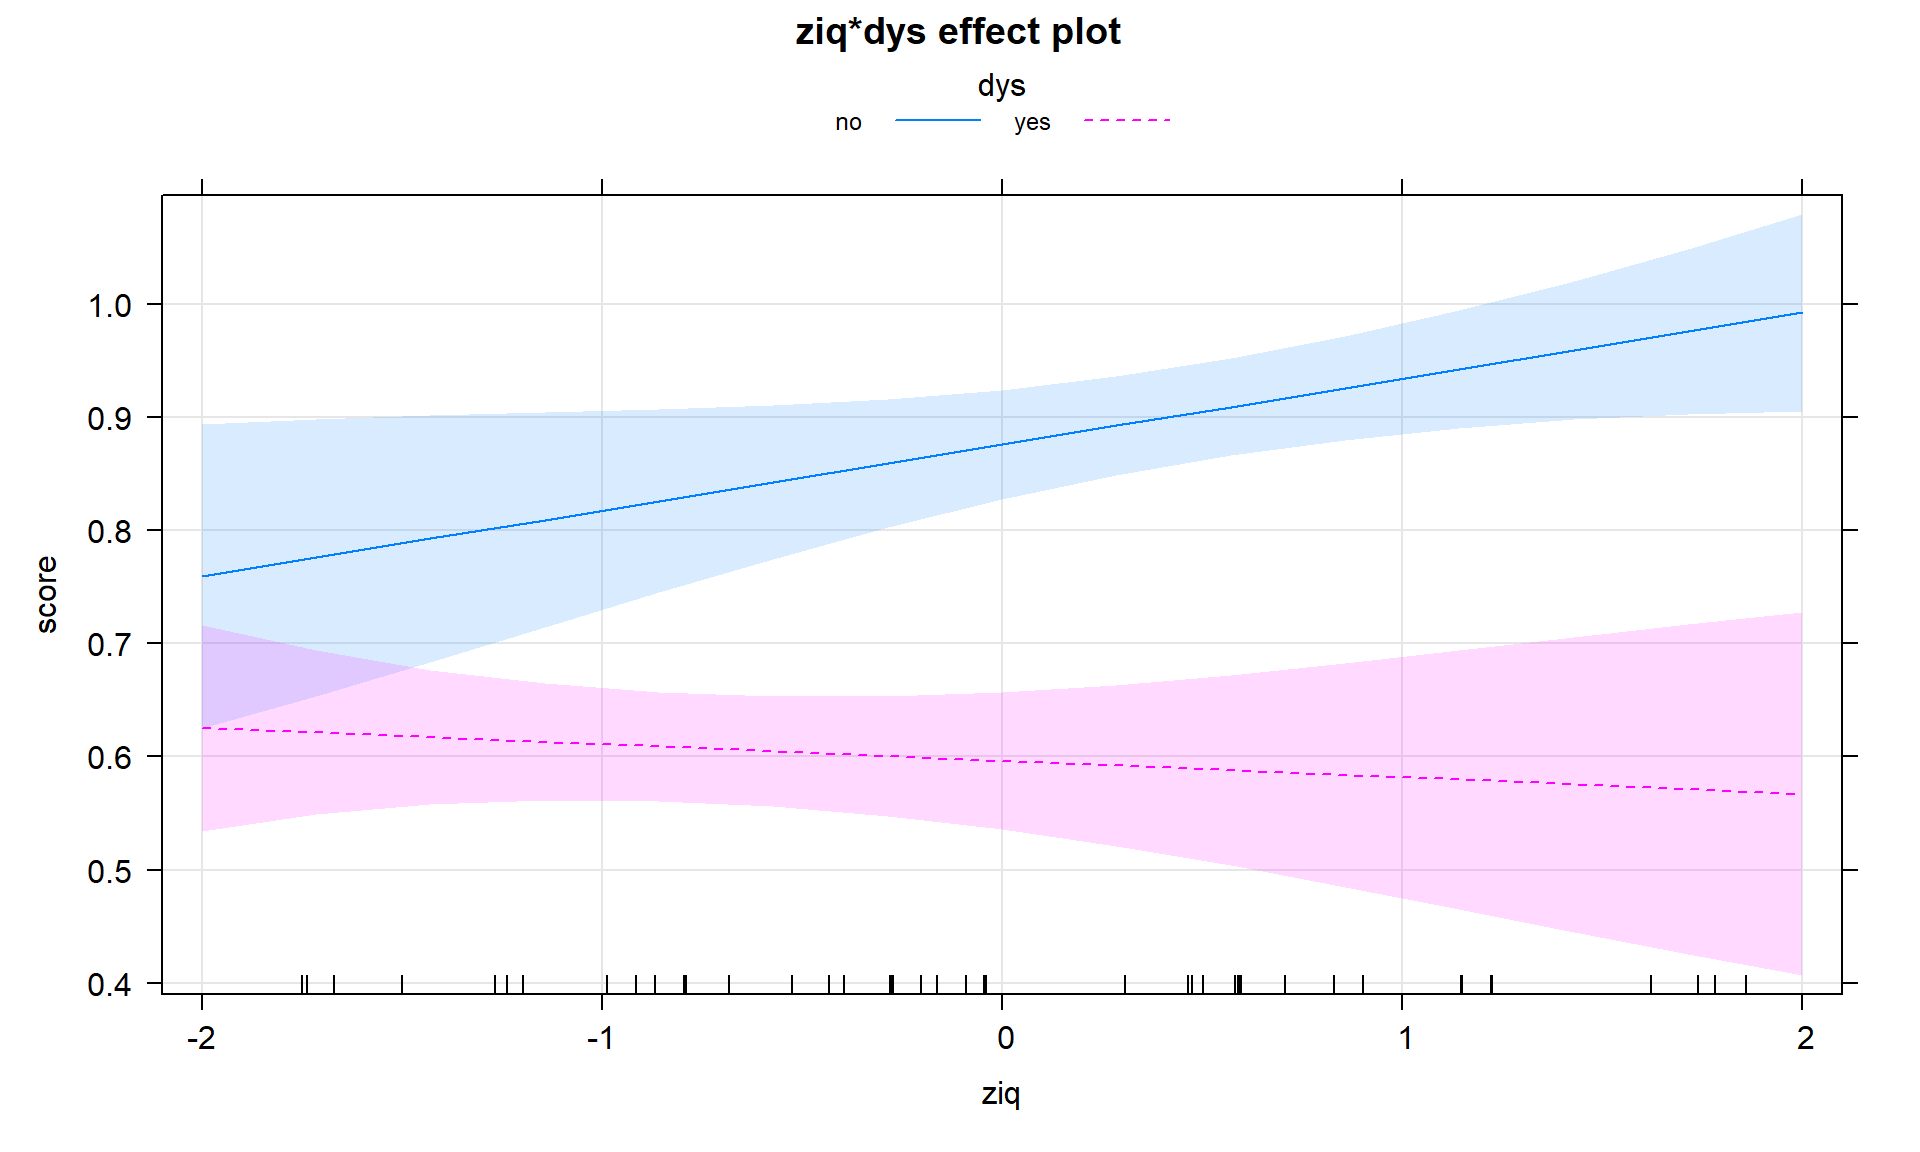 Term-plots for interaction model for reading scores using the multiline = T option to overlay the results for the two groups on one plot.